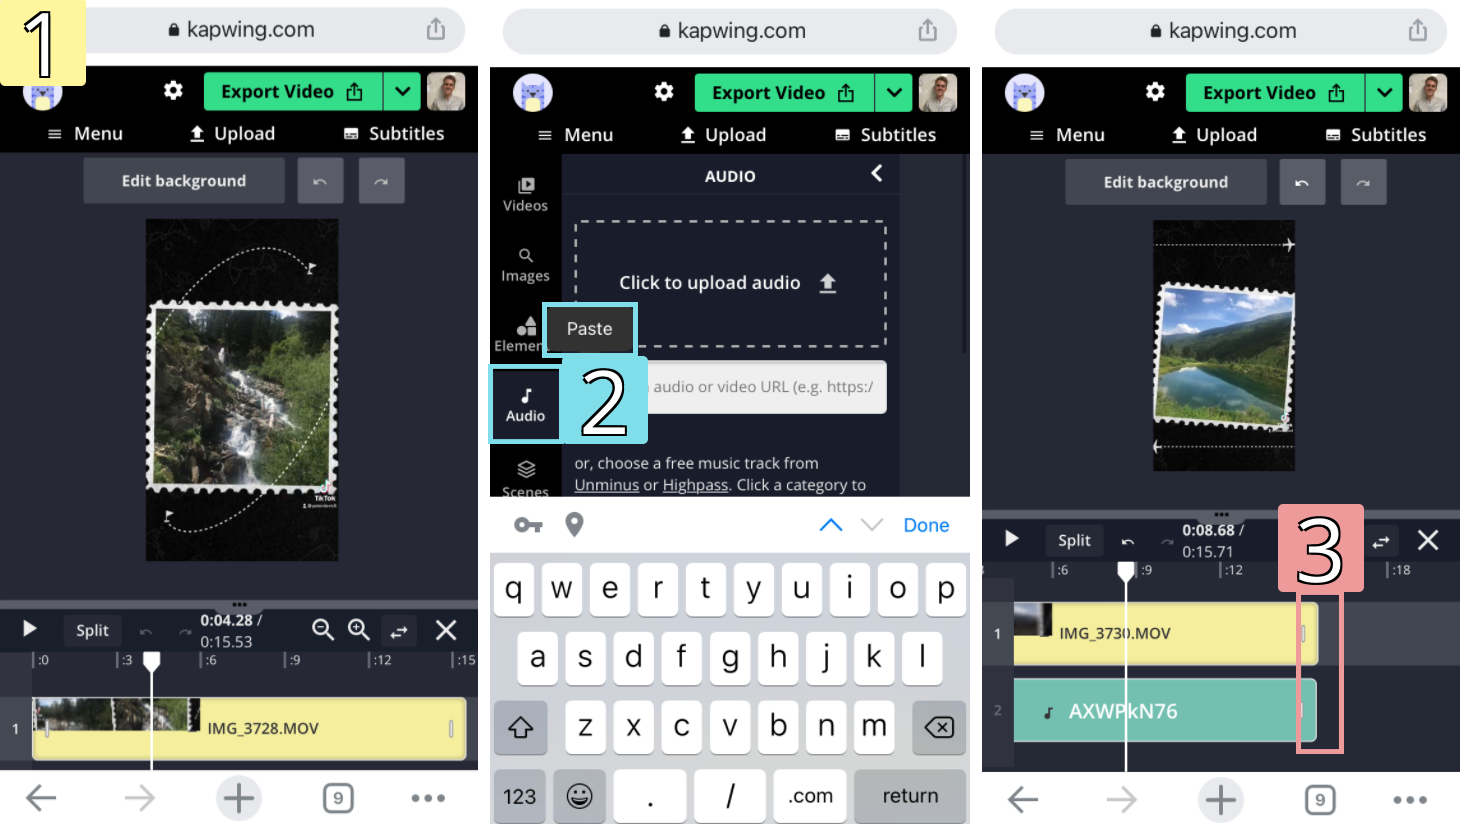 Screenshots showing how to add your own sound to a TikTok video in the Kapwing Studio. 